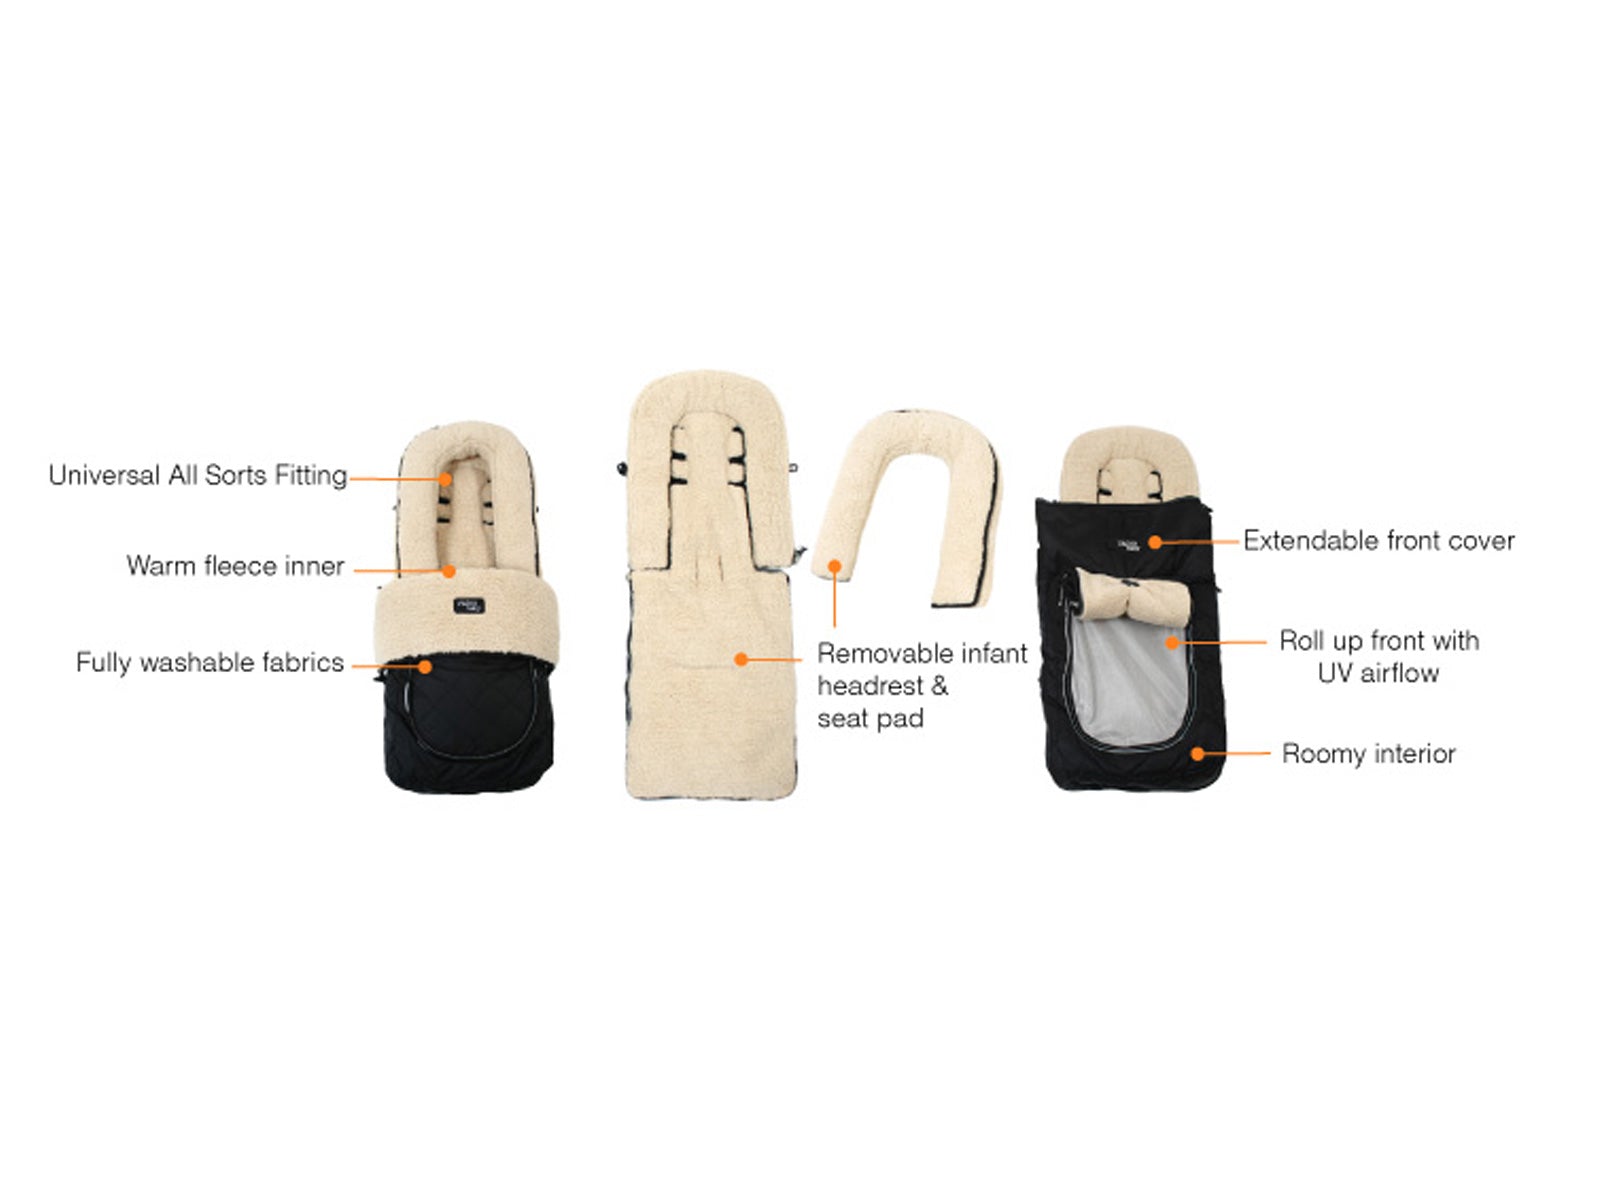 VALCO BABY Universal Deluxe Footmuff - ANB Baby -$100 - $300